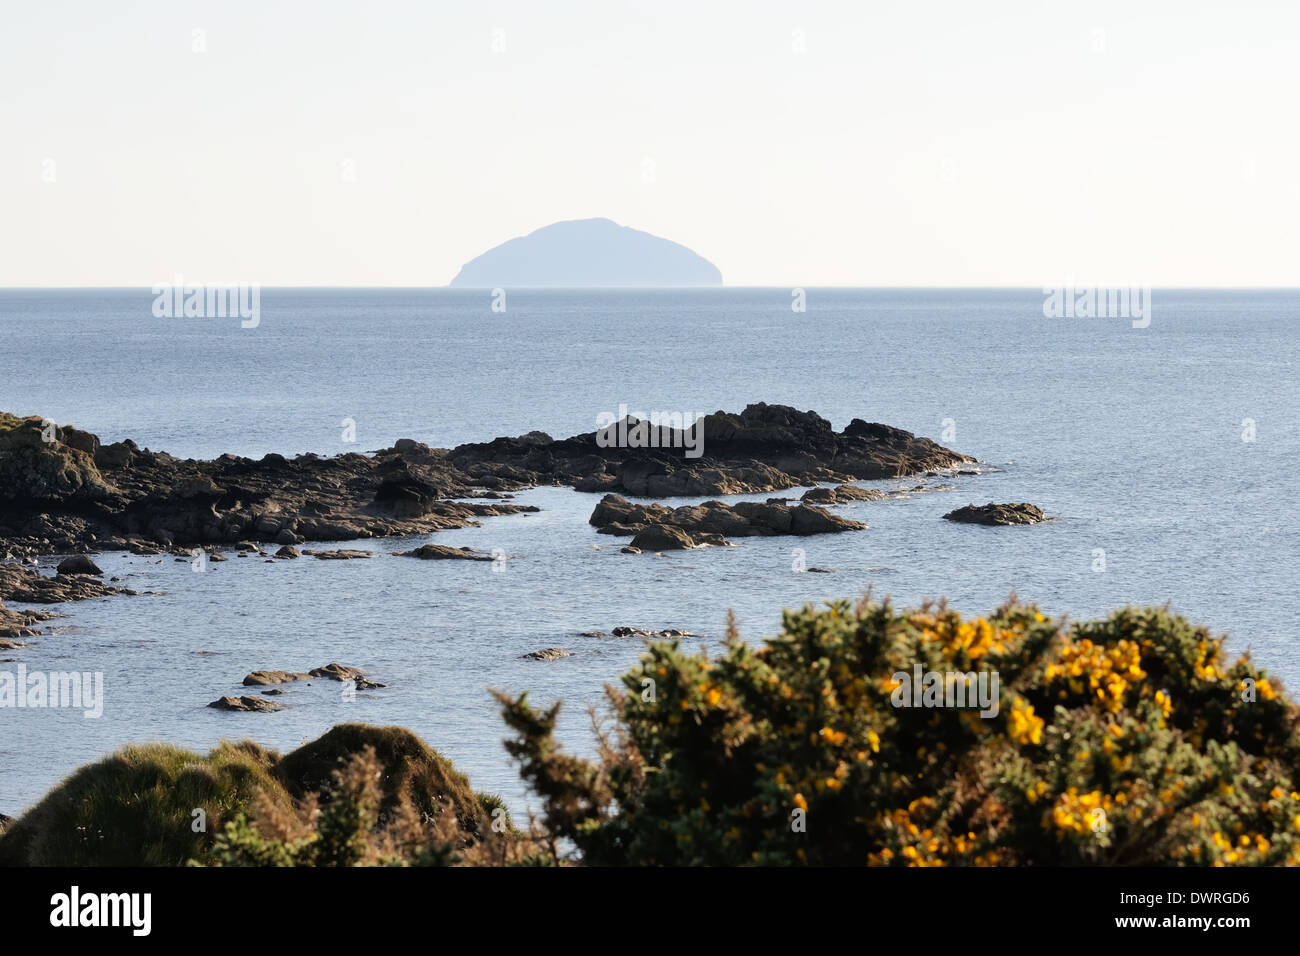 A view of Ailsa Craig from the shoreline at Turnberry, Ayrshire, Scotland, UK, Europe. Stock Photo